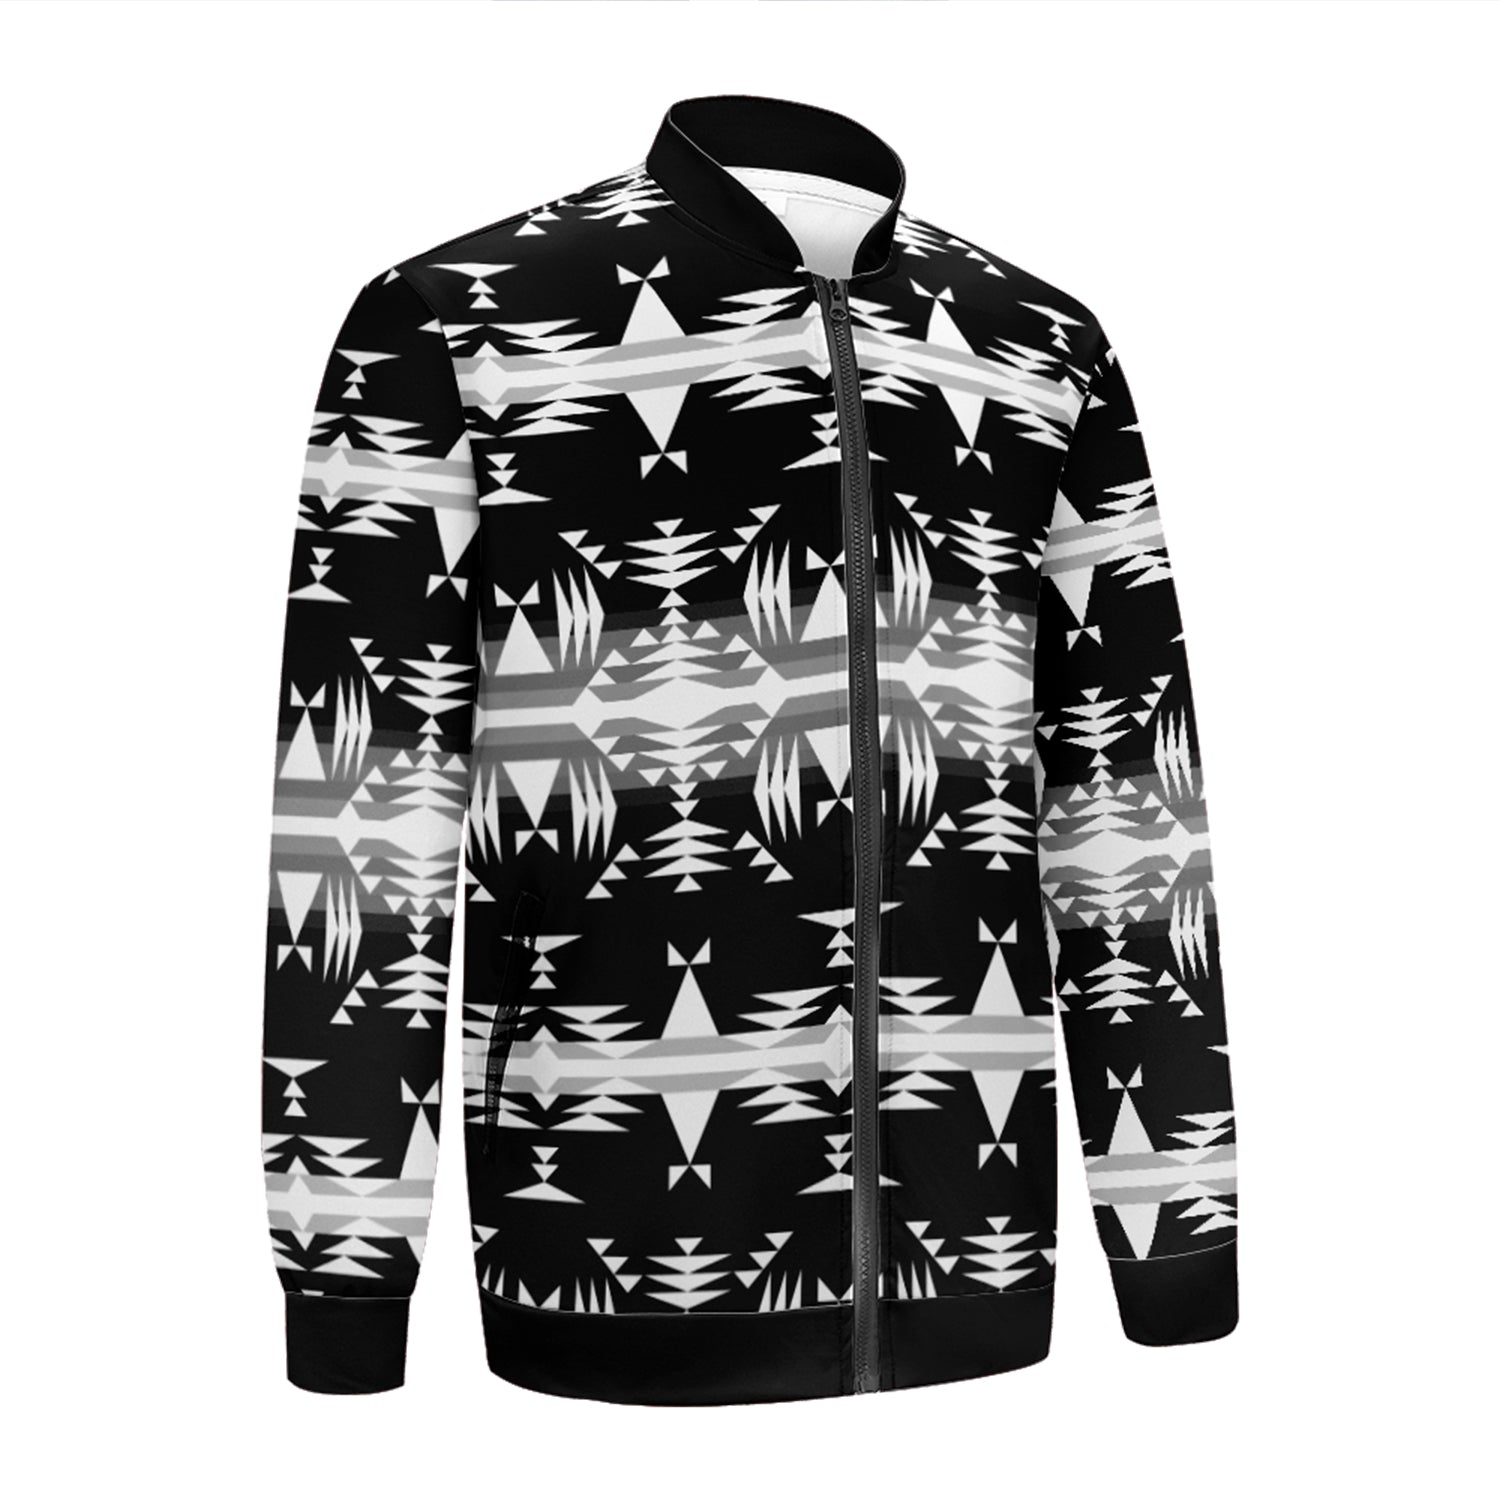 Between the Mountains White and Black Unisex Collar Zipper Jacket